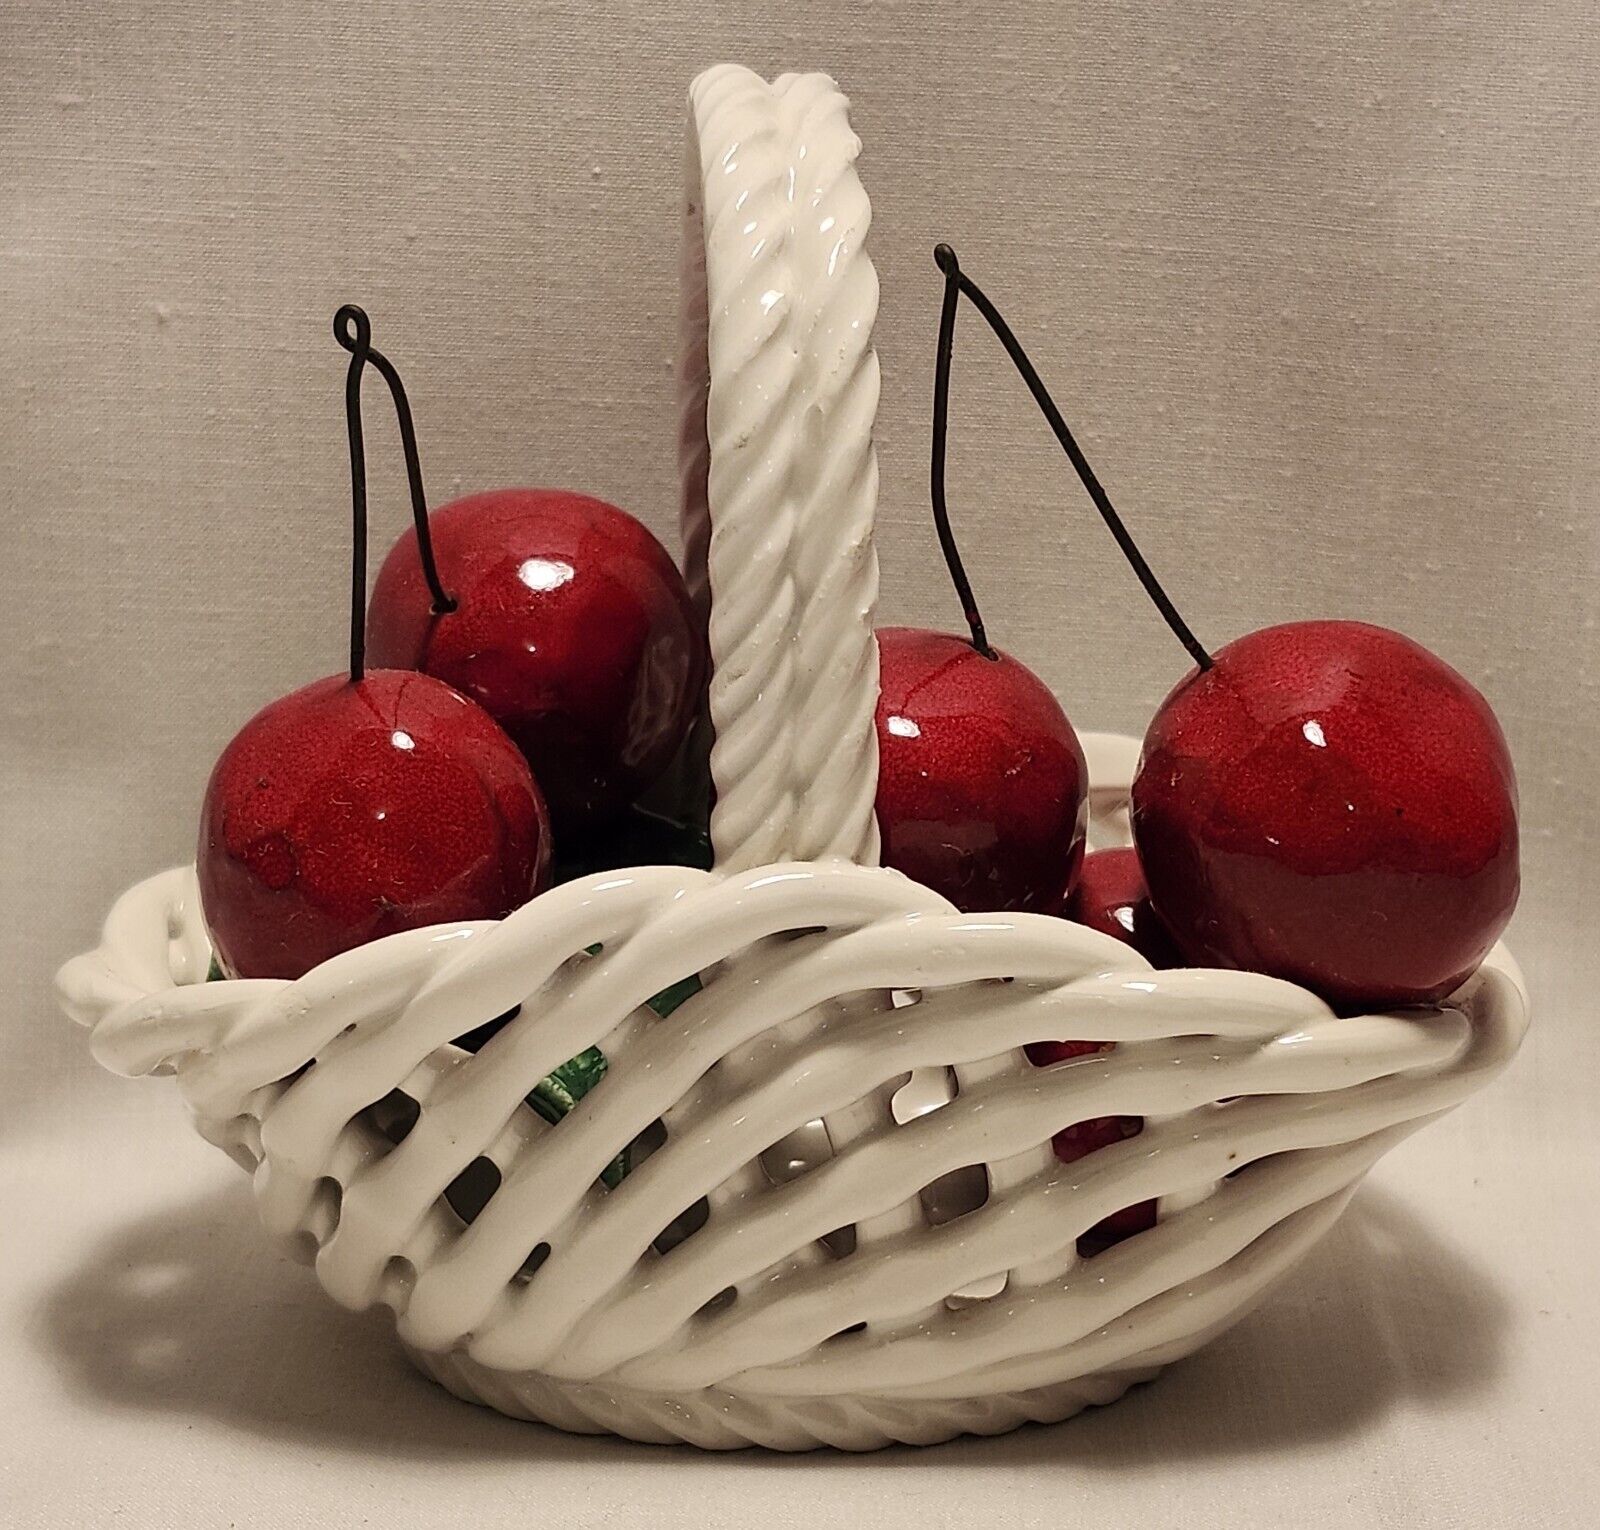 Italian Ceramic Handcrafted Woven Basket With Cherries 4\